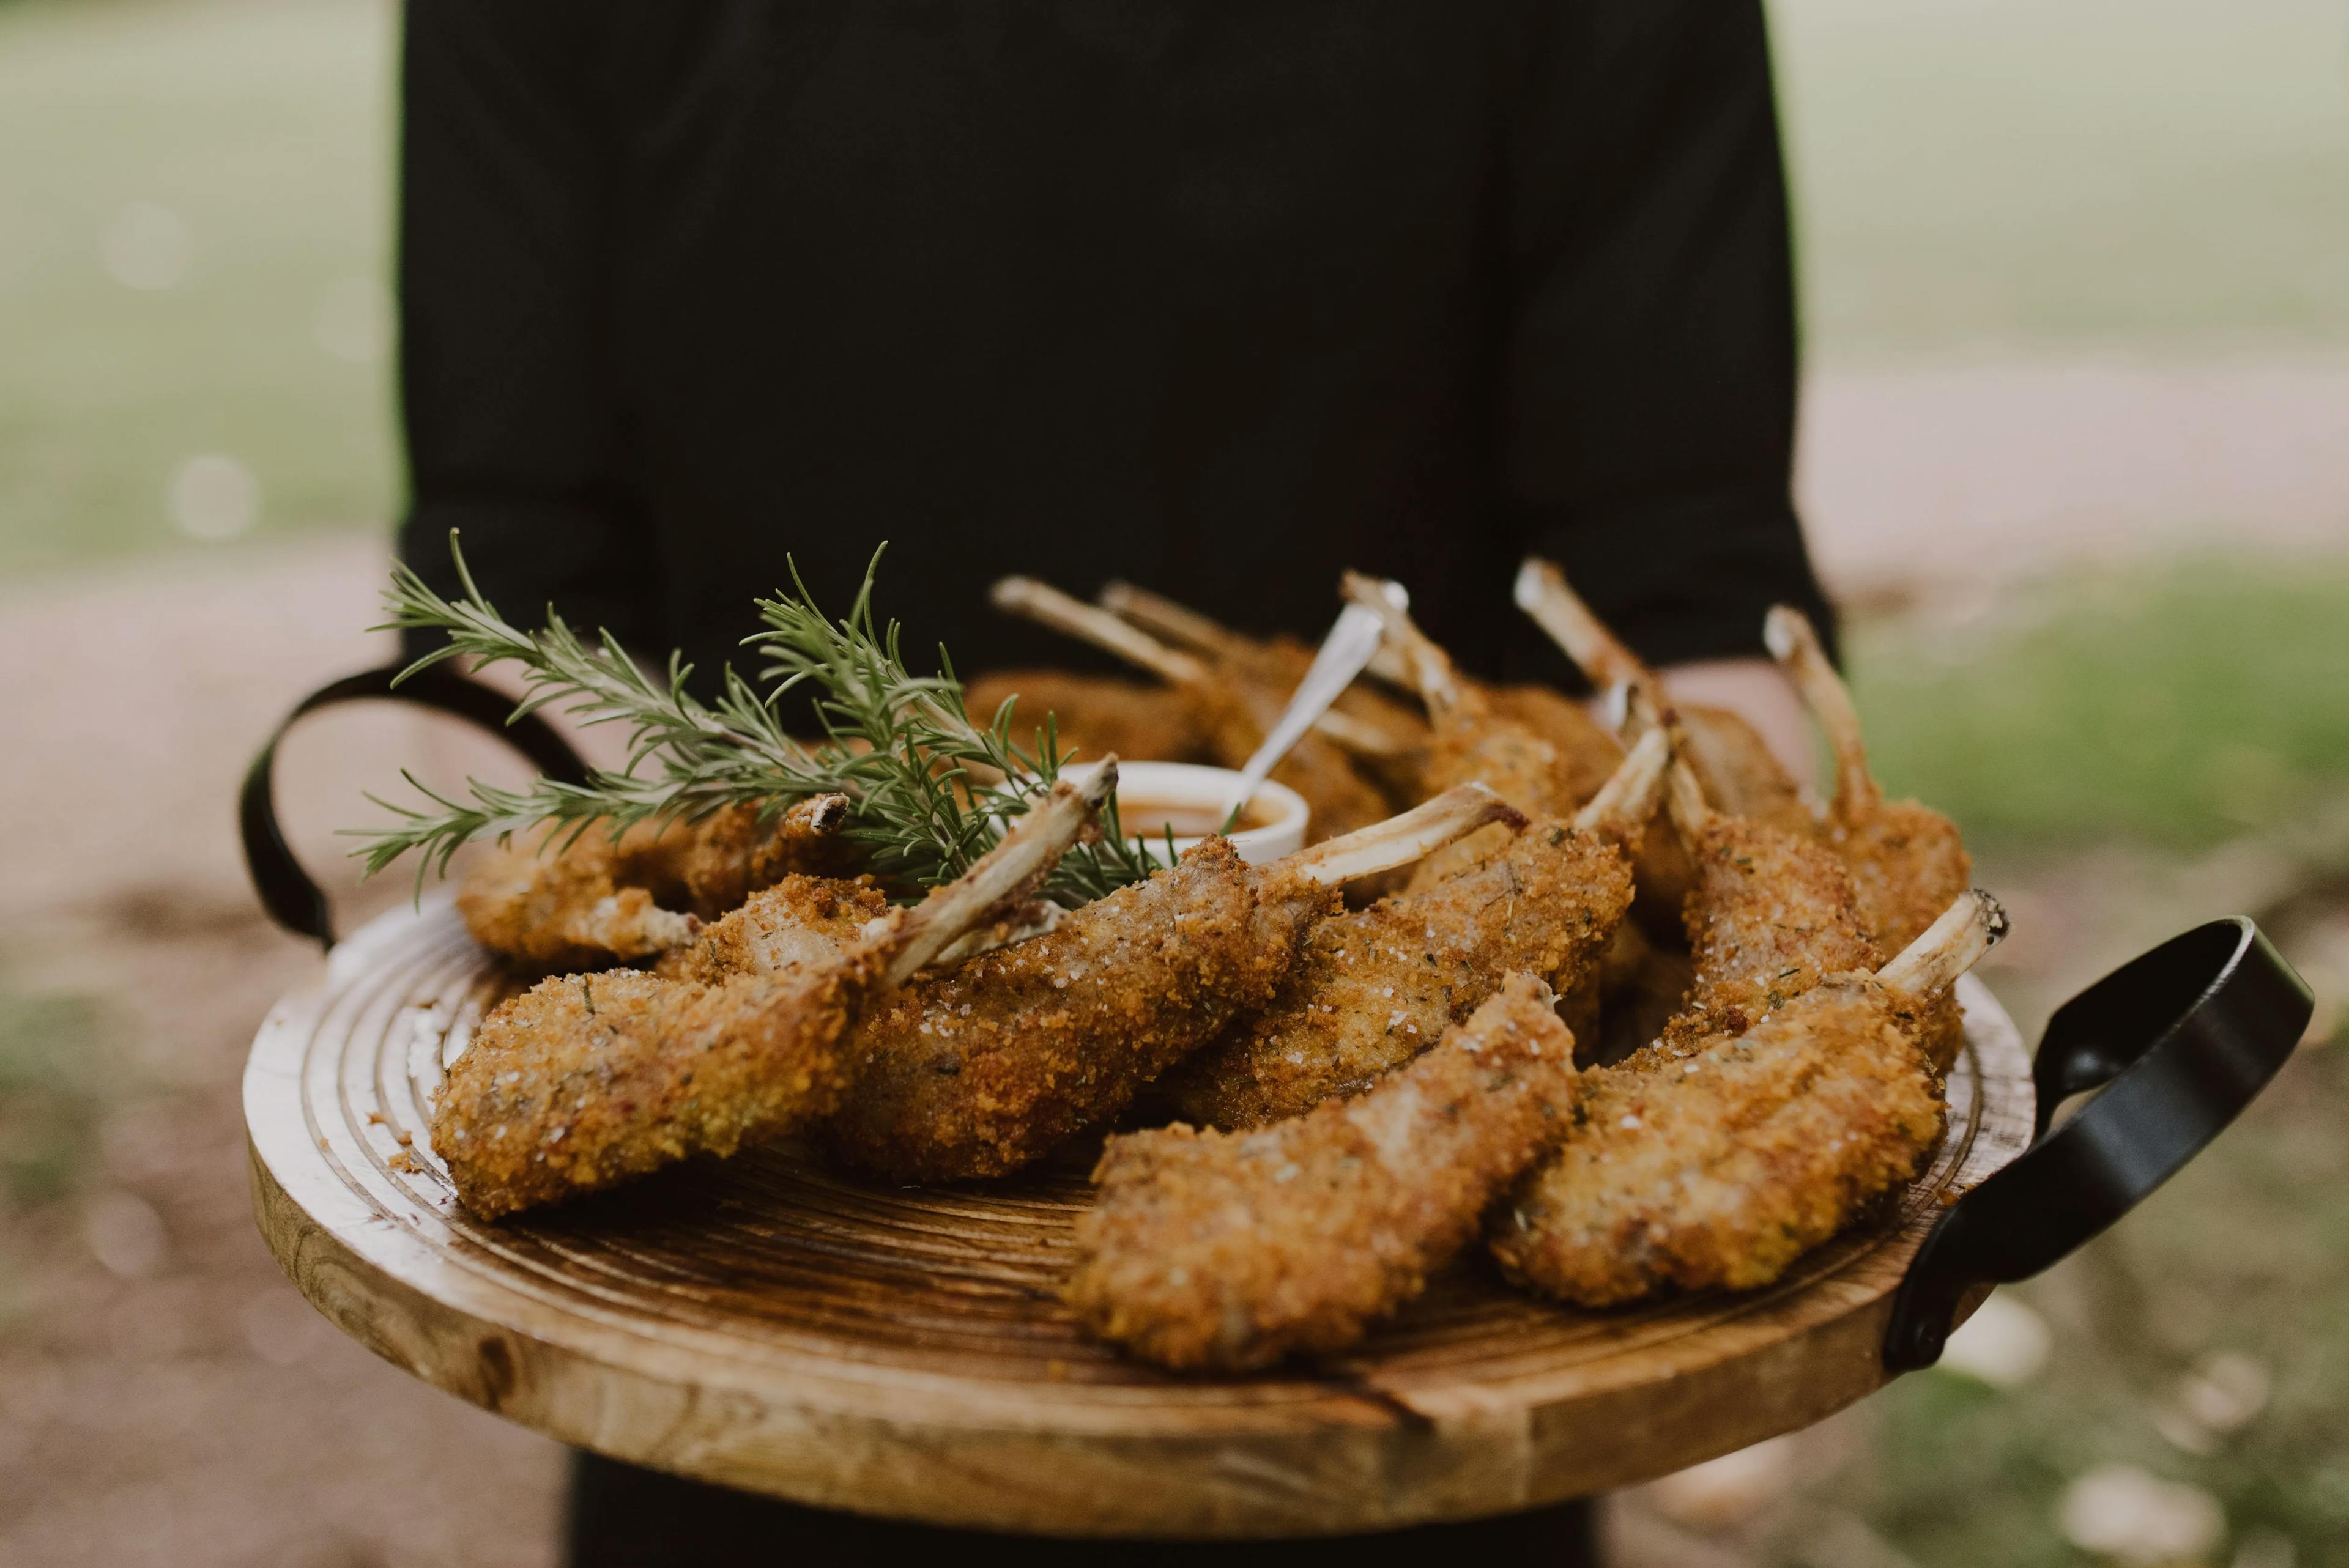 A person holding a round wooden serving board with a variety of breaded and fried lamb chops, garnished with sprigs of rosemary and accompanied by a small bowl of dipping sauce, set against a blurred outdoor background.